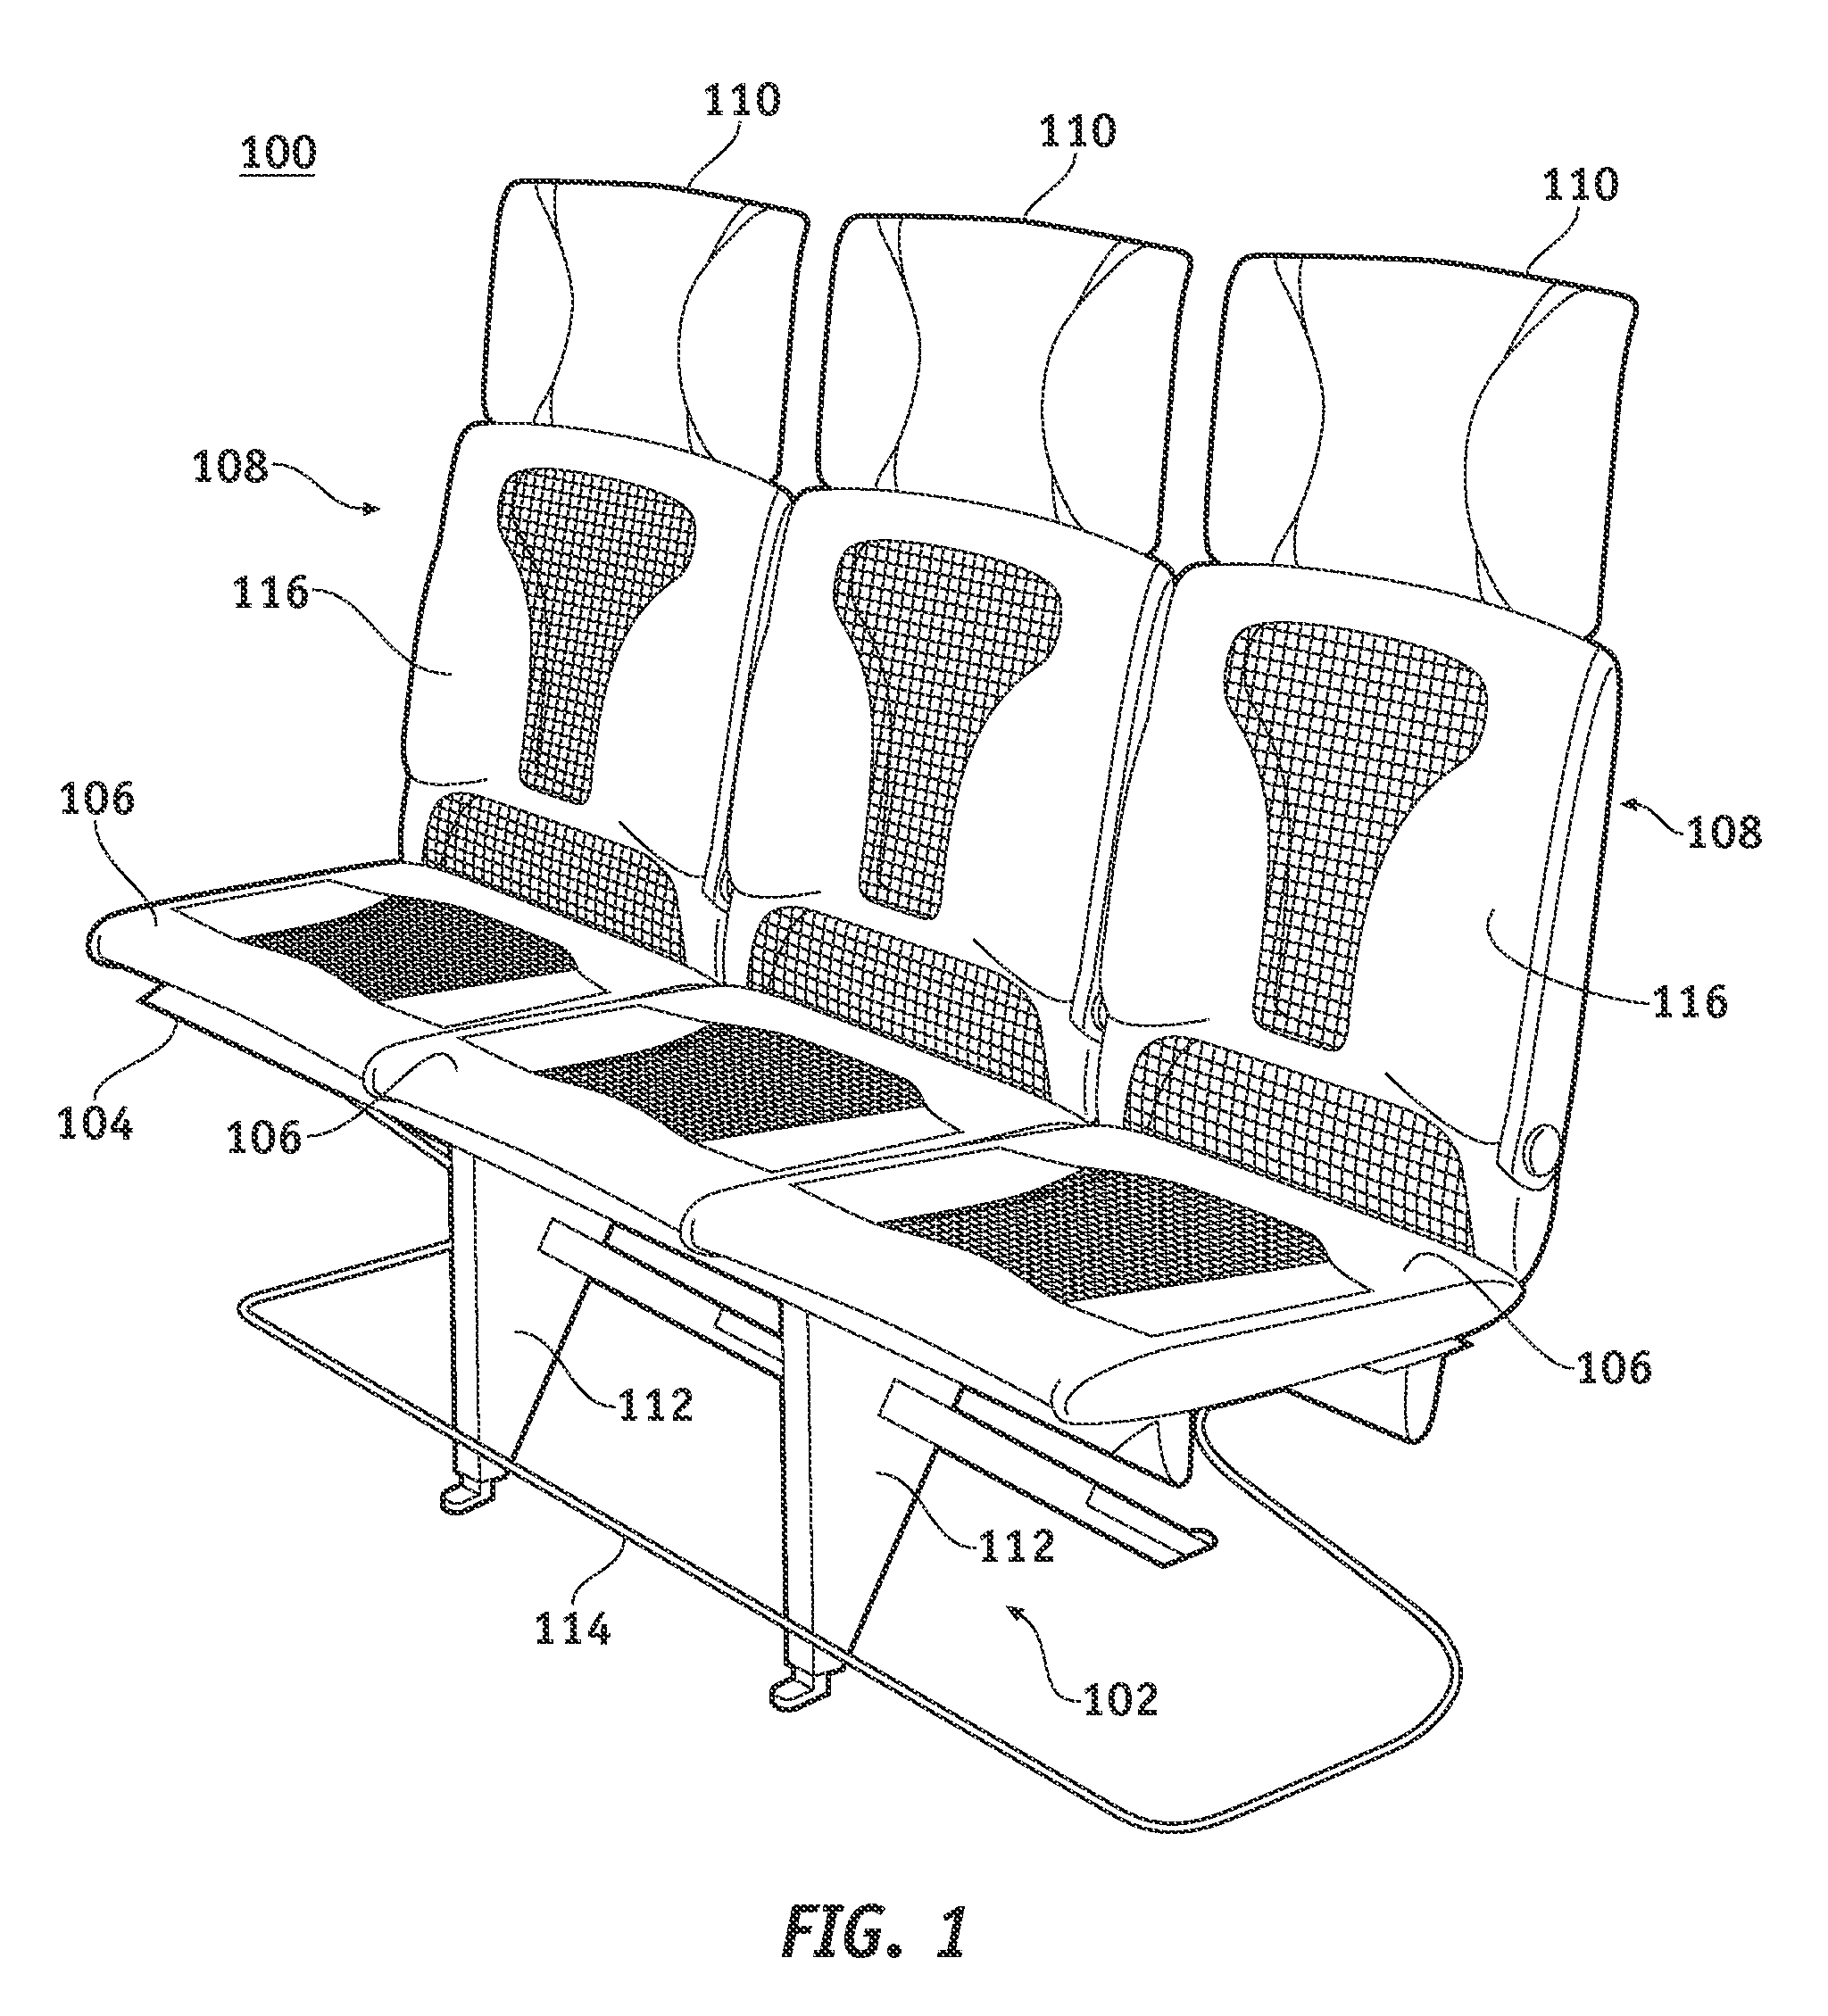 Composite seat back structure for a lightweight aircraft seat assembly